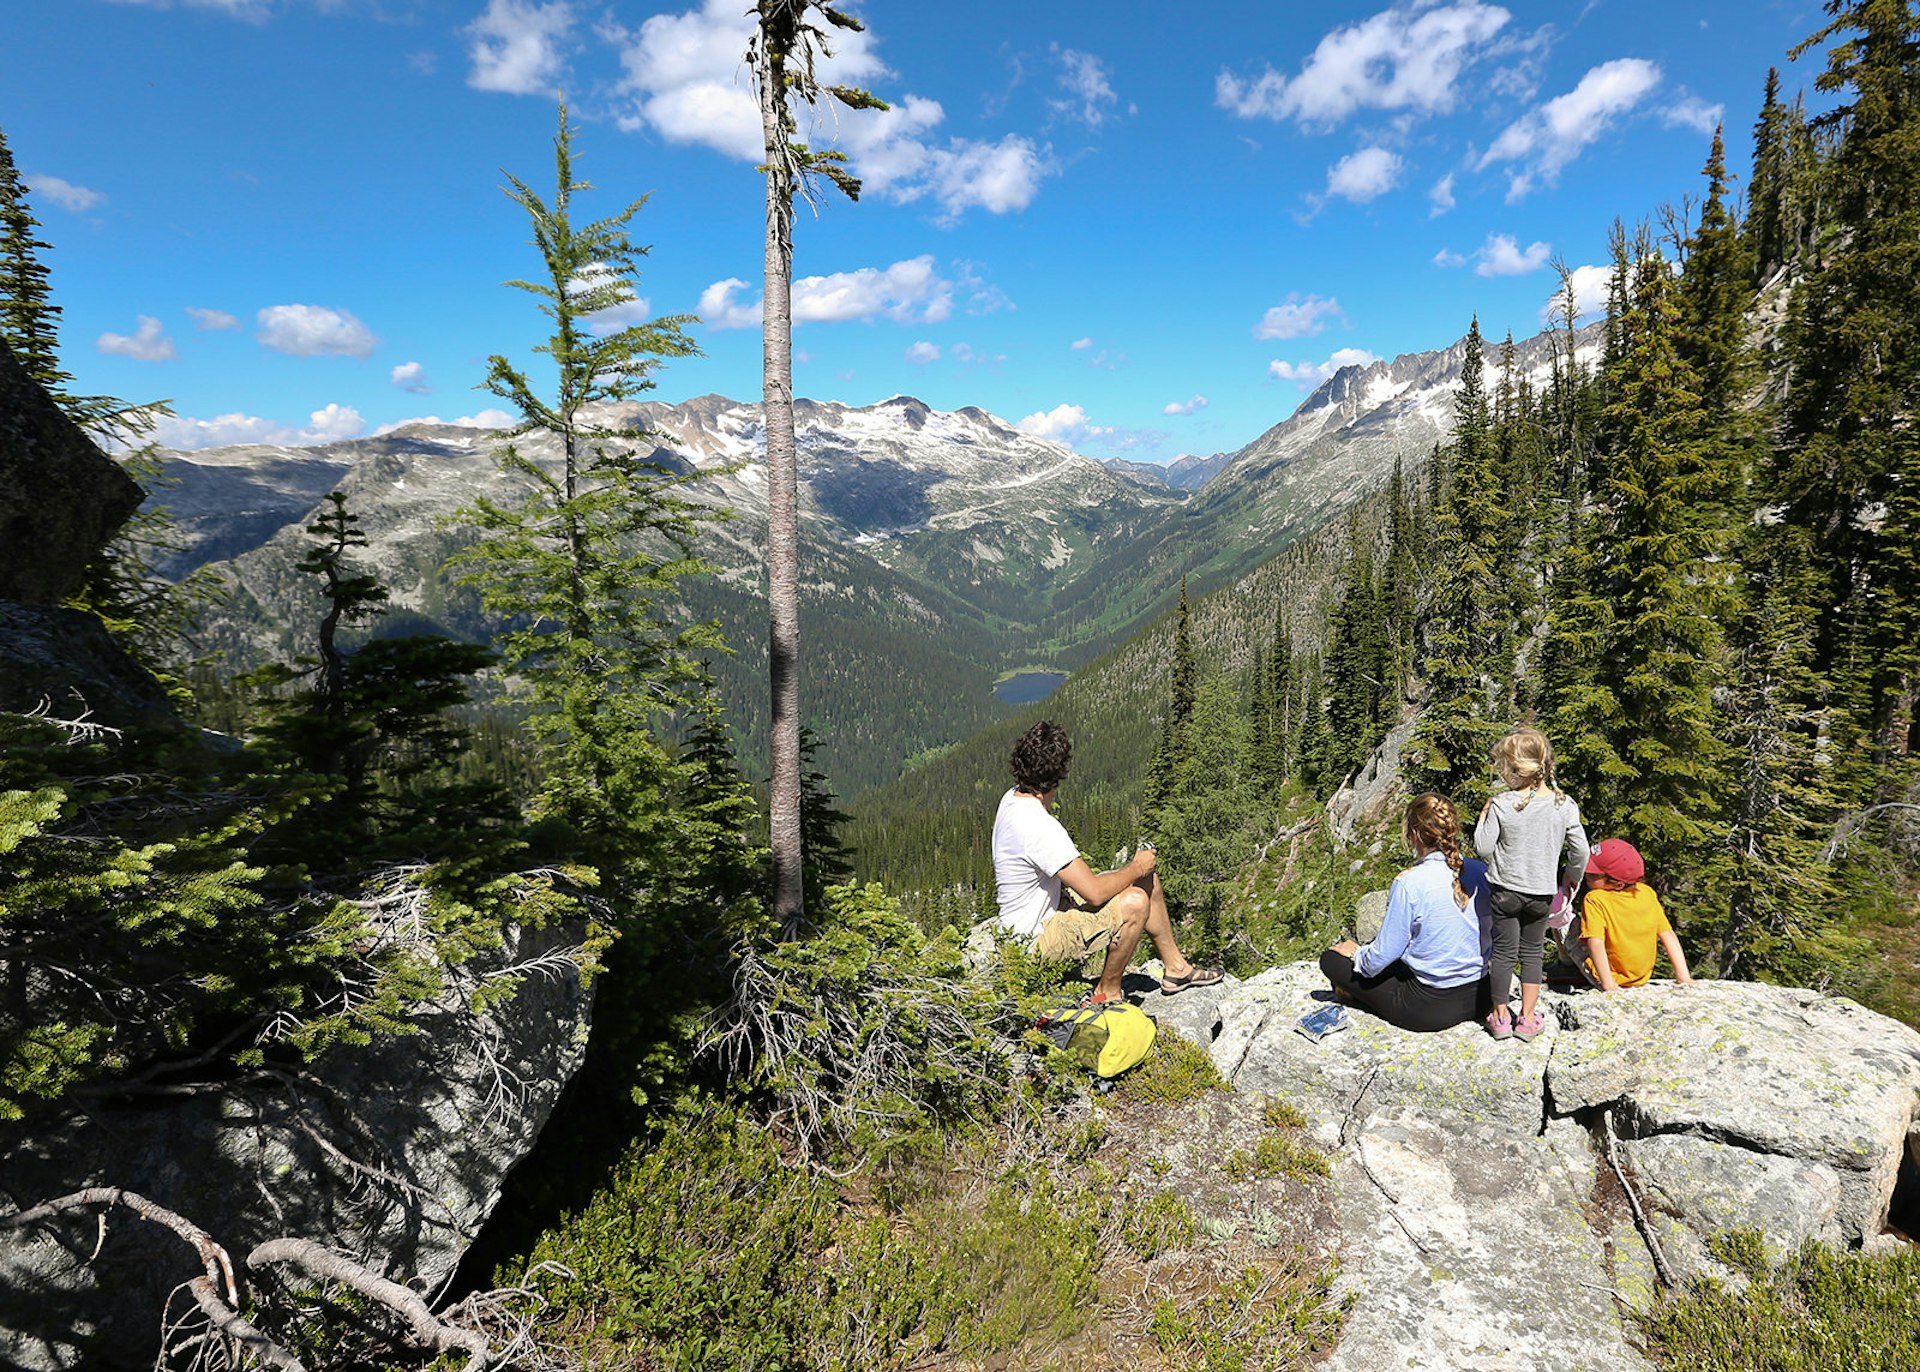 Canadian Prime Minister Justin Trudeau with his family enjoying a spectacular view of the Canadian Rockies, British Columbia © Adam Scotti / PMO